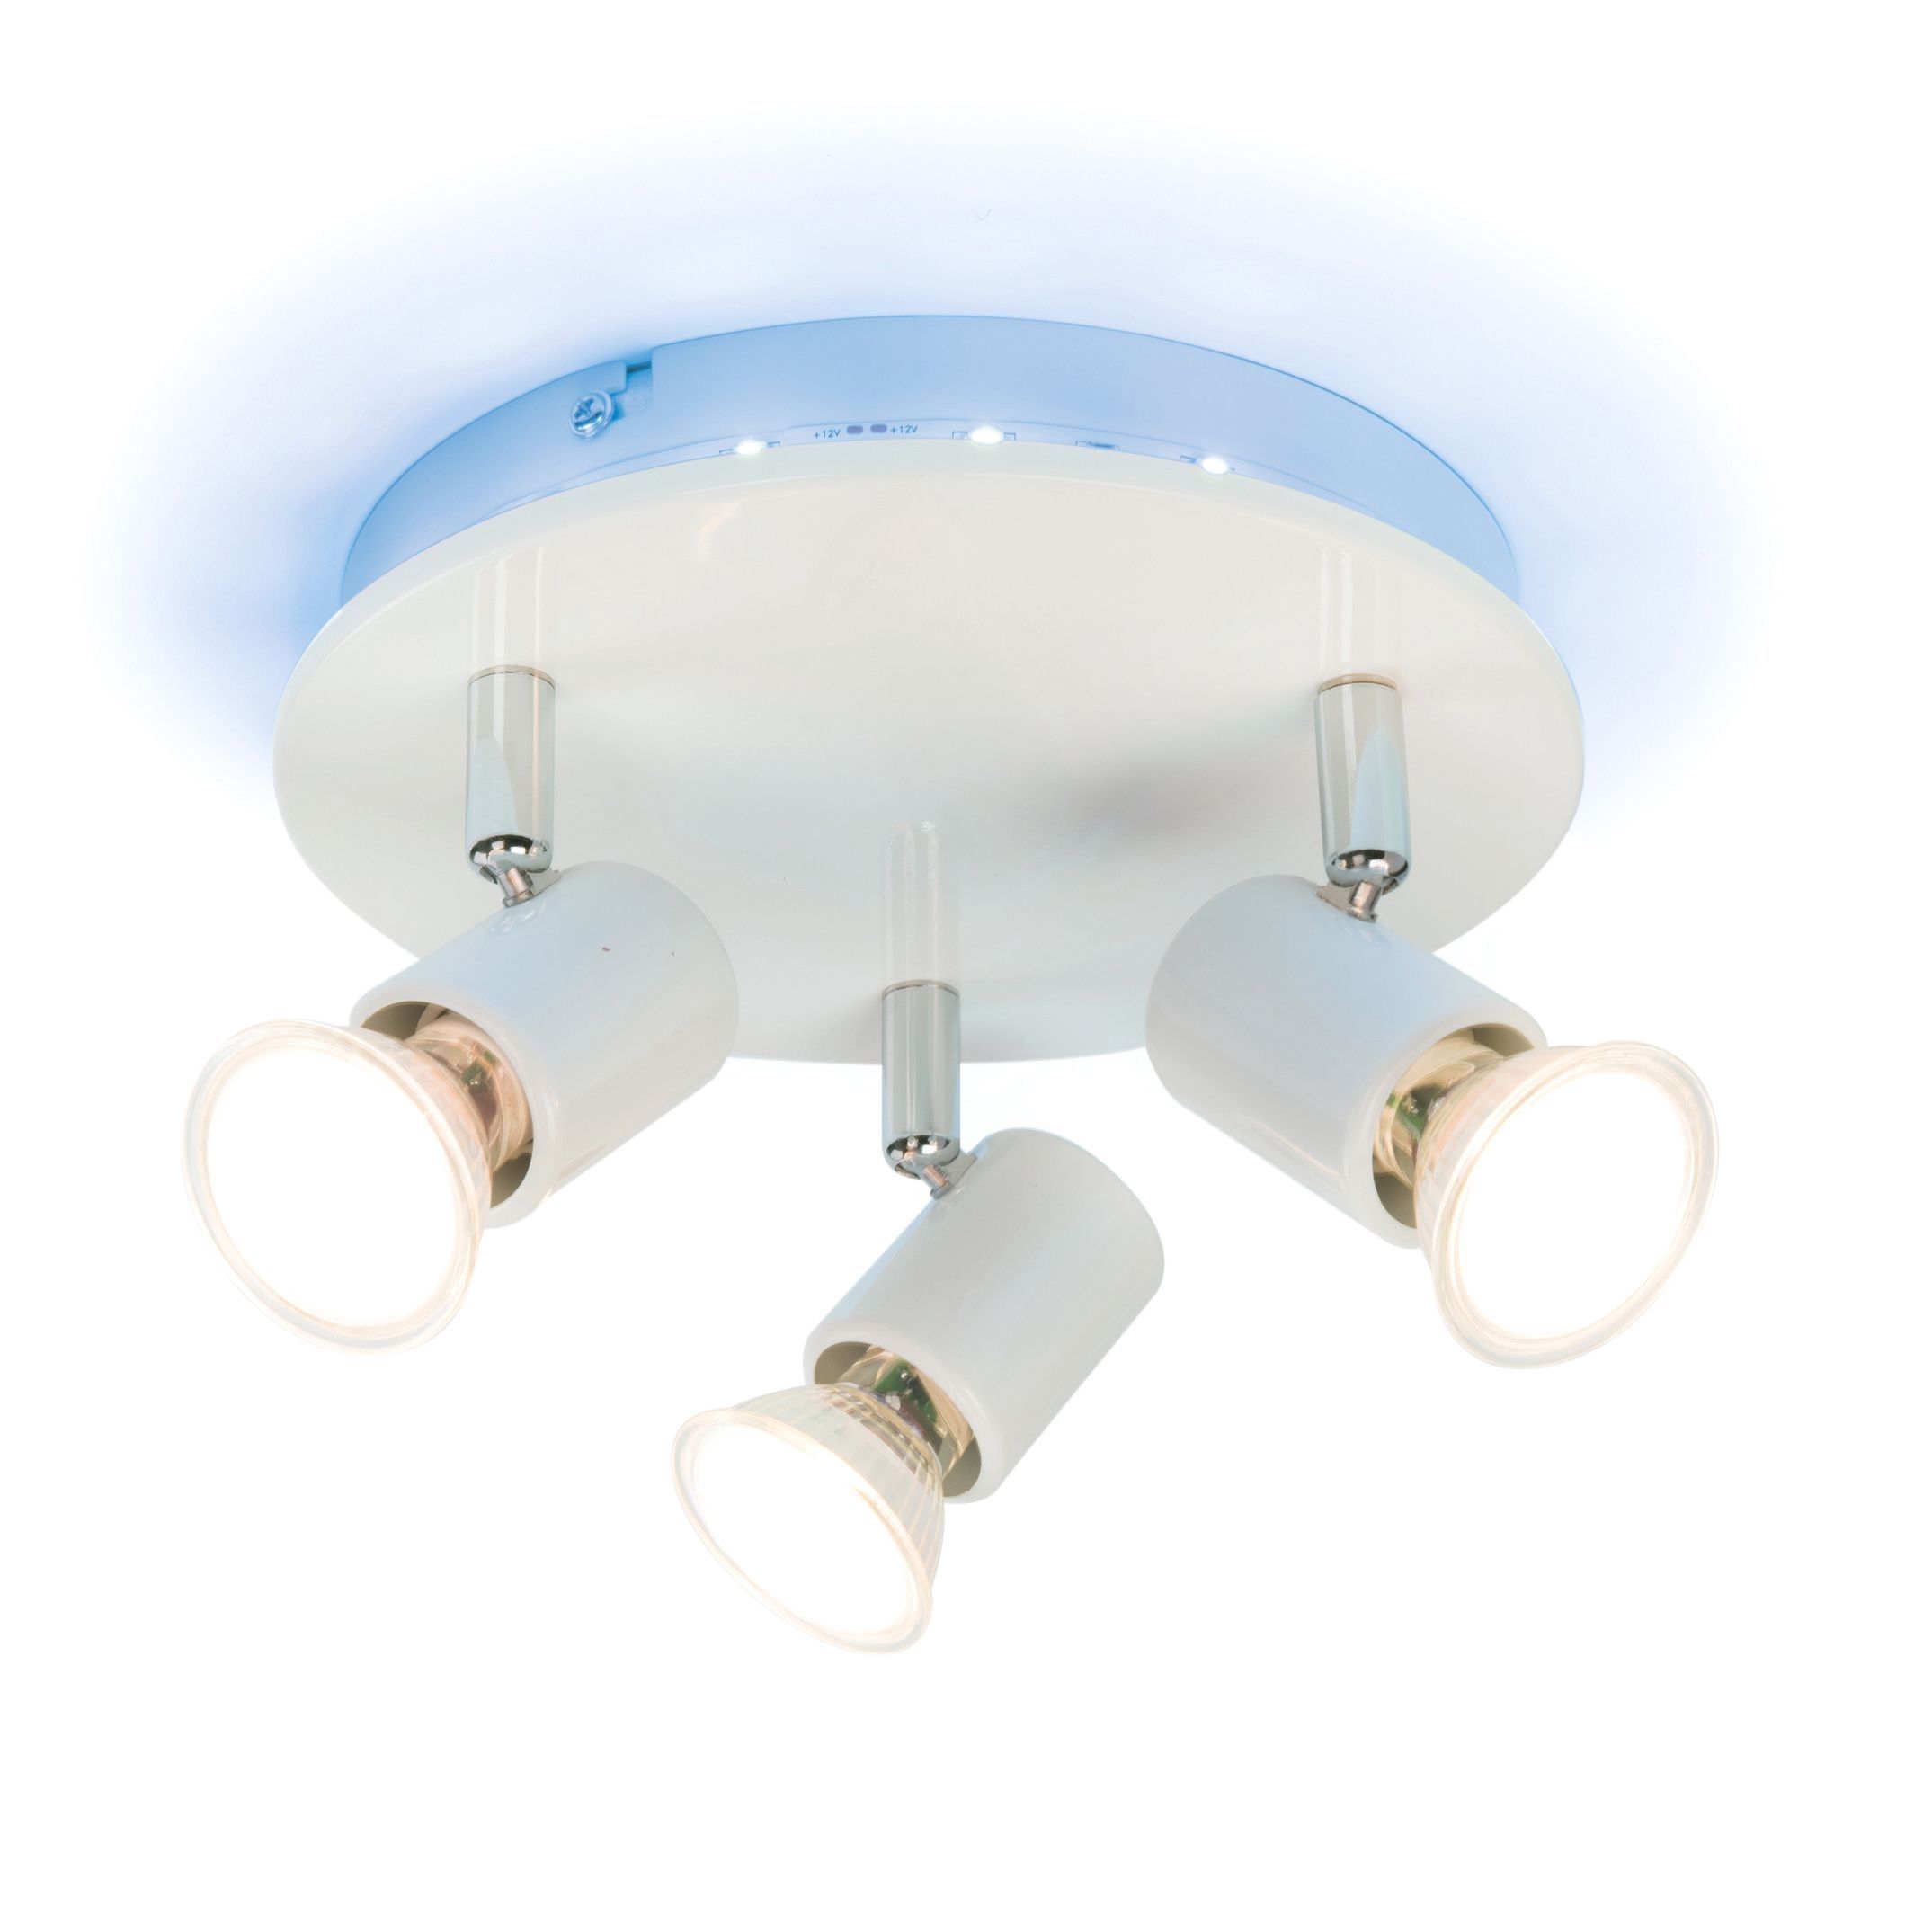 Spectrum Colour Changing White Gloss 3 Lamp Ceiling Light | Spectrum Regarding Outdoor Ceiling Lights At B&q (View 3 of 15)